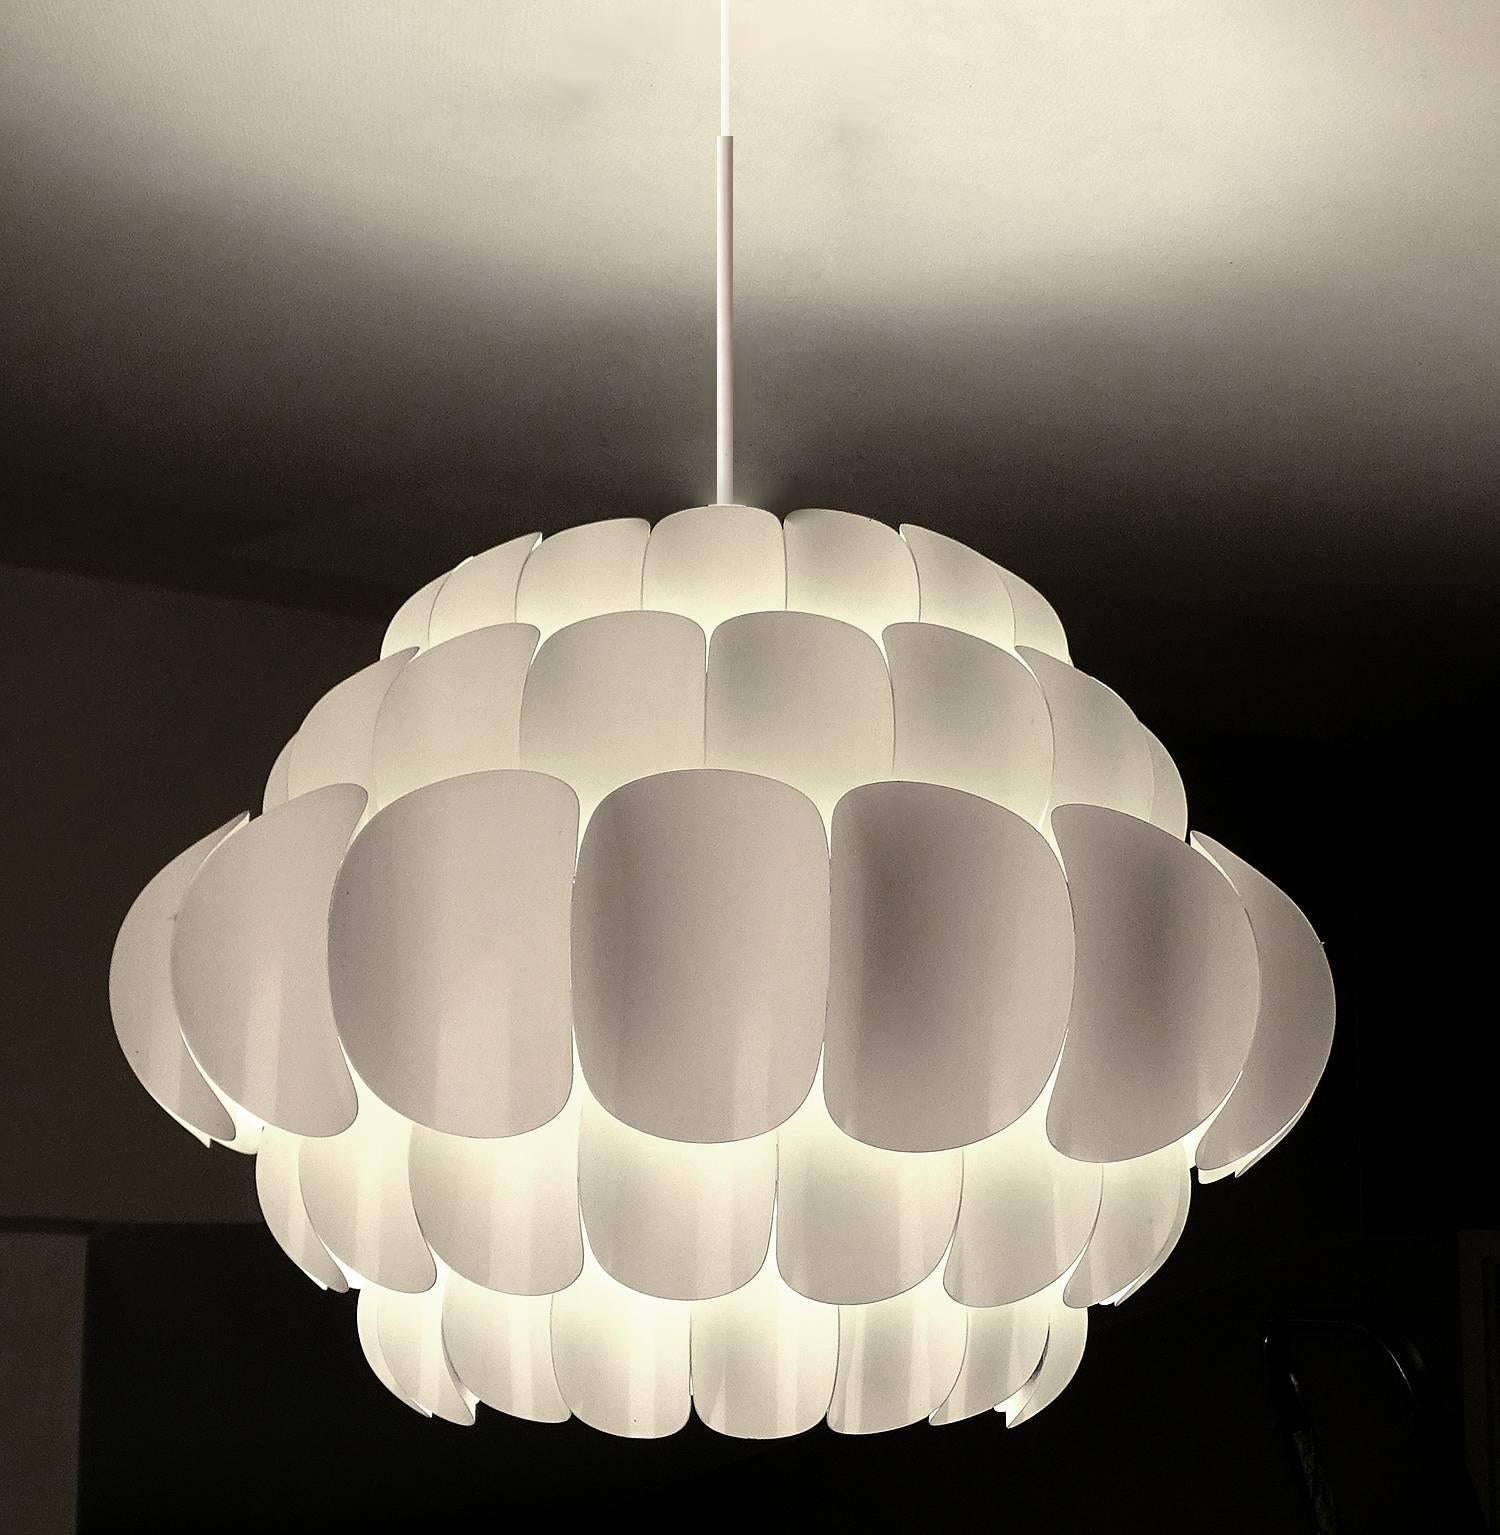 Dimensions
51.18 in.H / 130 cmH (cable can be shortened)
Diameter
22.44 in. (57 cm)

One standard bulb up to 200 watts. LED compatible

Very large chandelier by Theodor Müller  featuring five tiers of white enameled scalloped leaves of increasing